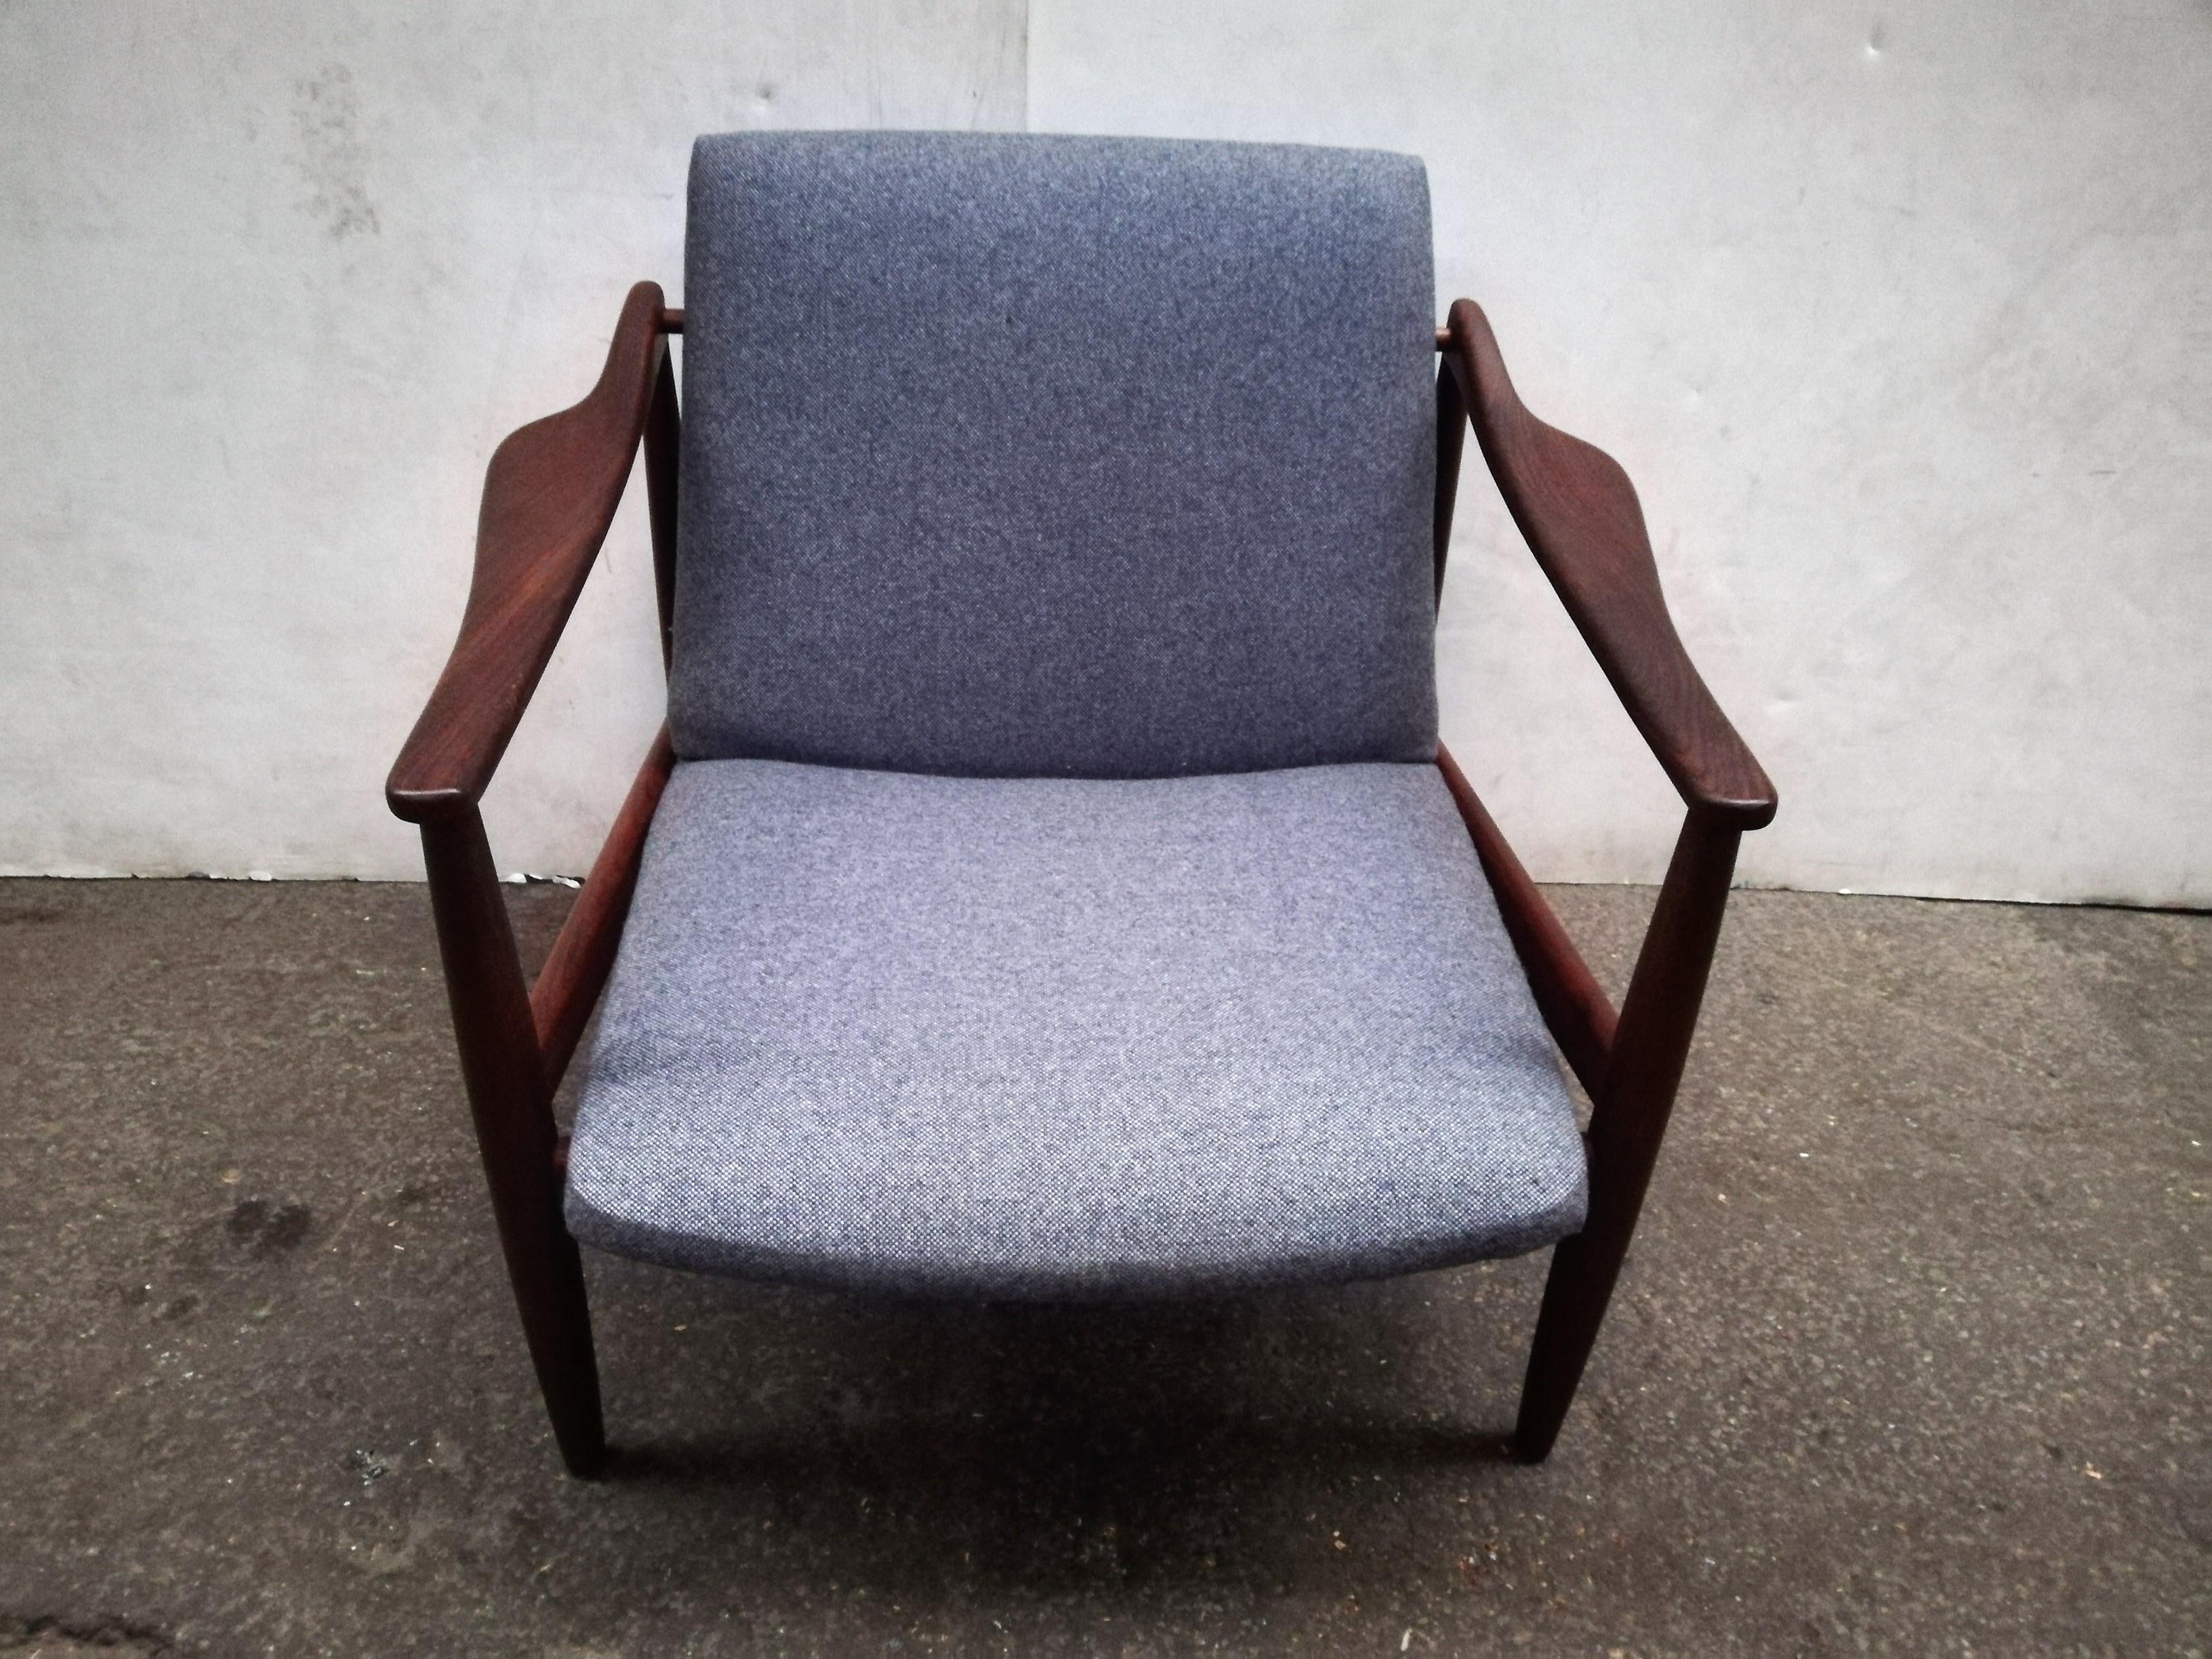 Beautiful mid-century easy chair by designer Hartmut Lohmeyer for Wilkhahn in Germany the 1950s. The chair is made of solid teak and have new upholstered back and seat cushions.